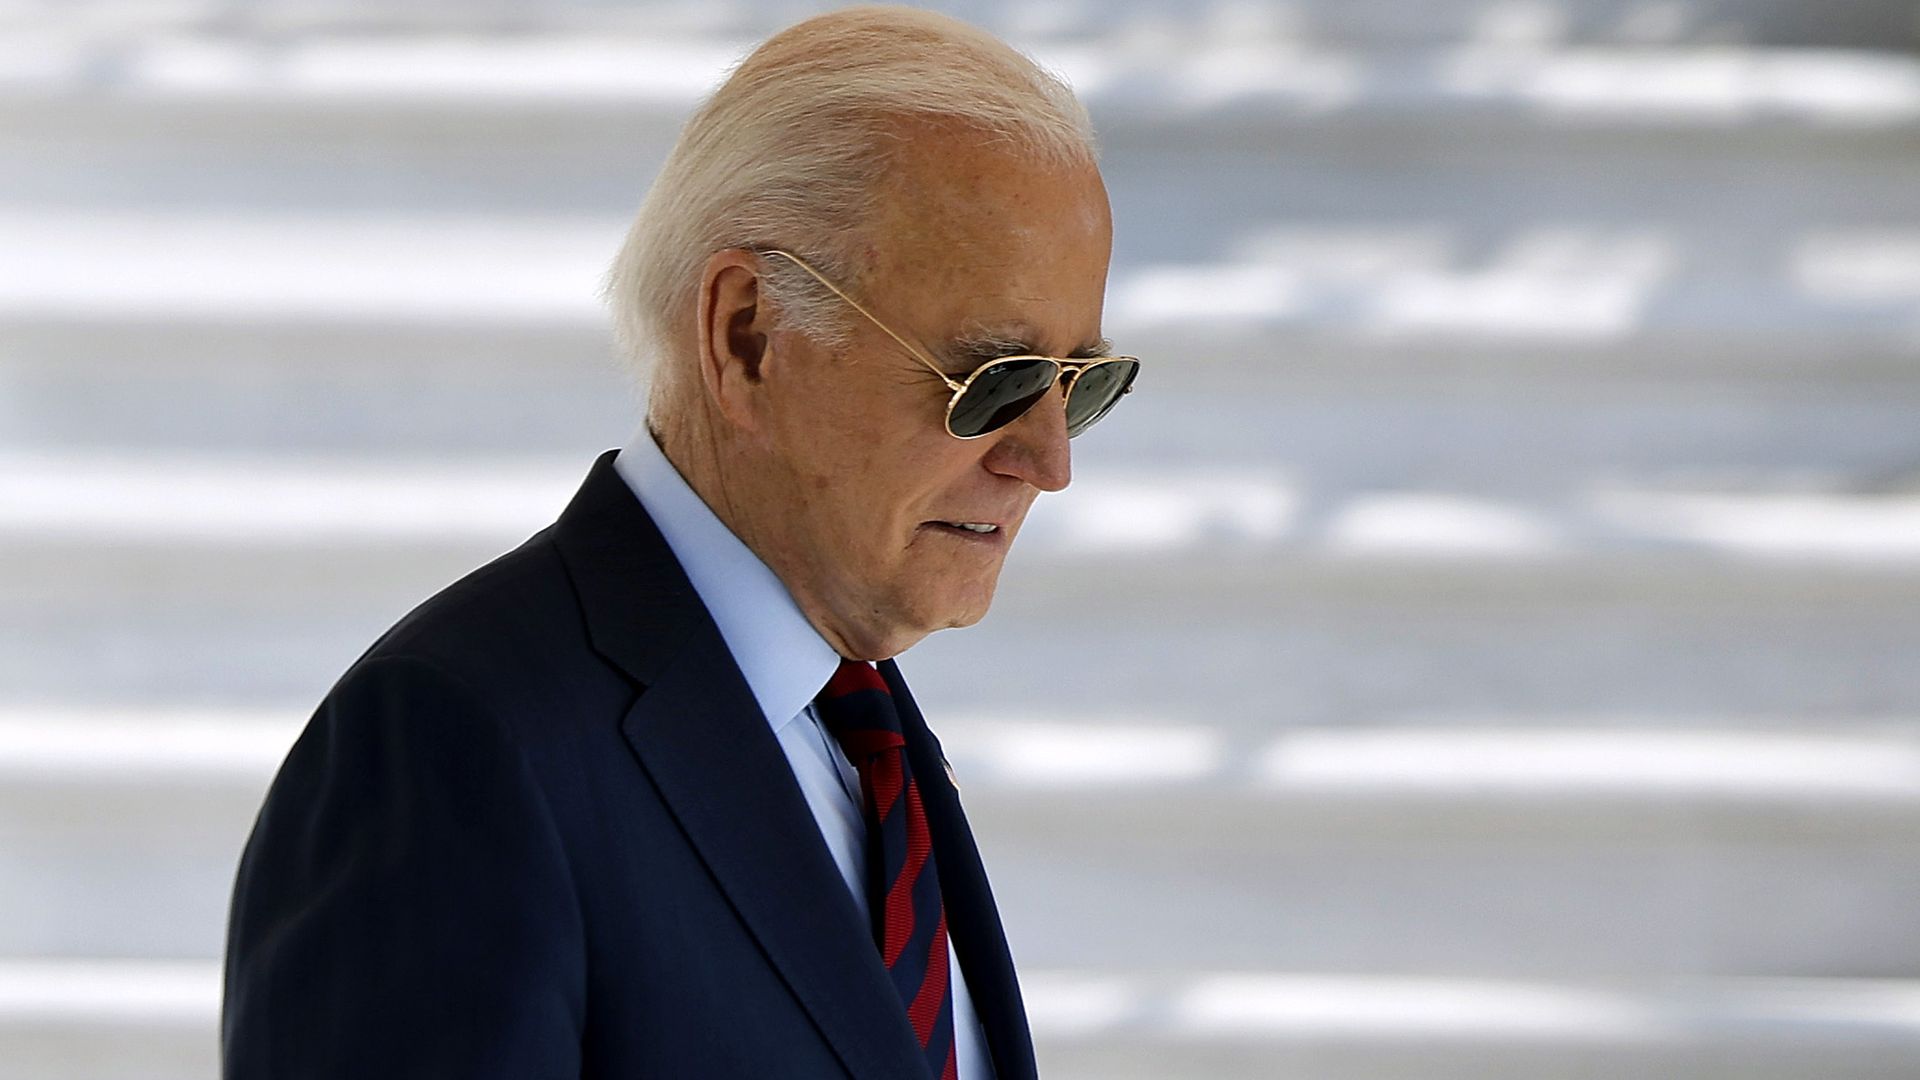 President Biden, in a blue suit, blue shirt and blue- and red-striped tie, and wearing sunglasses.